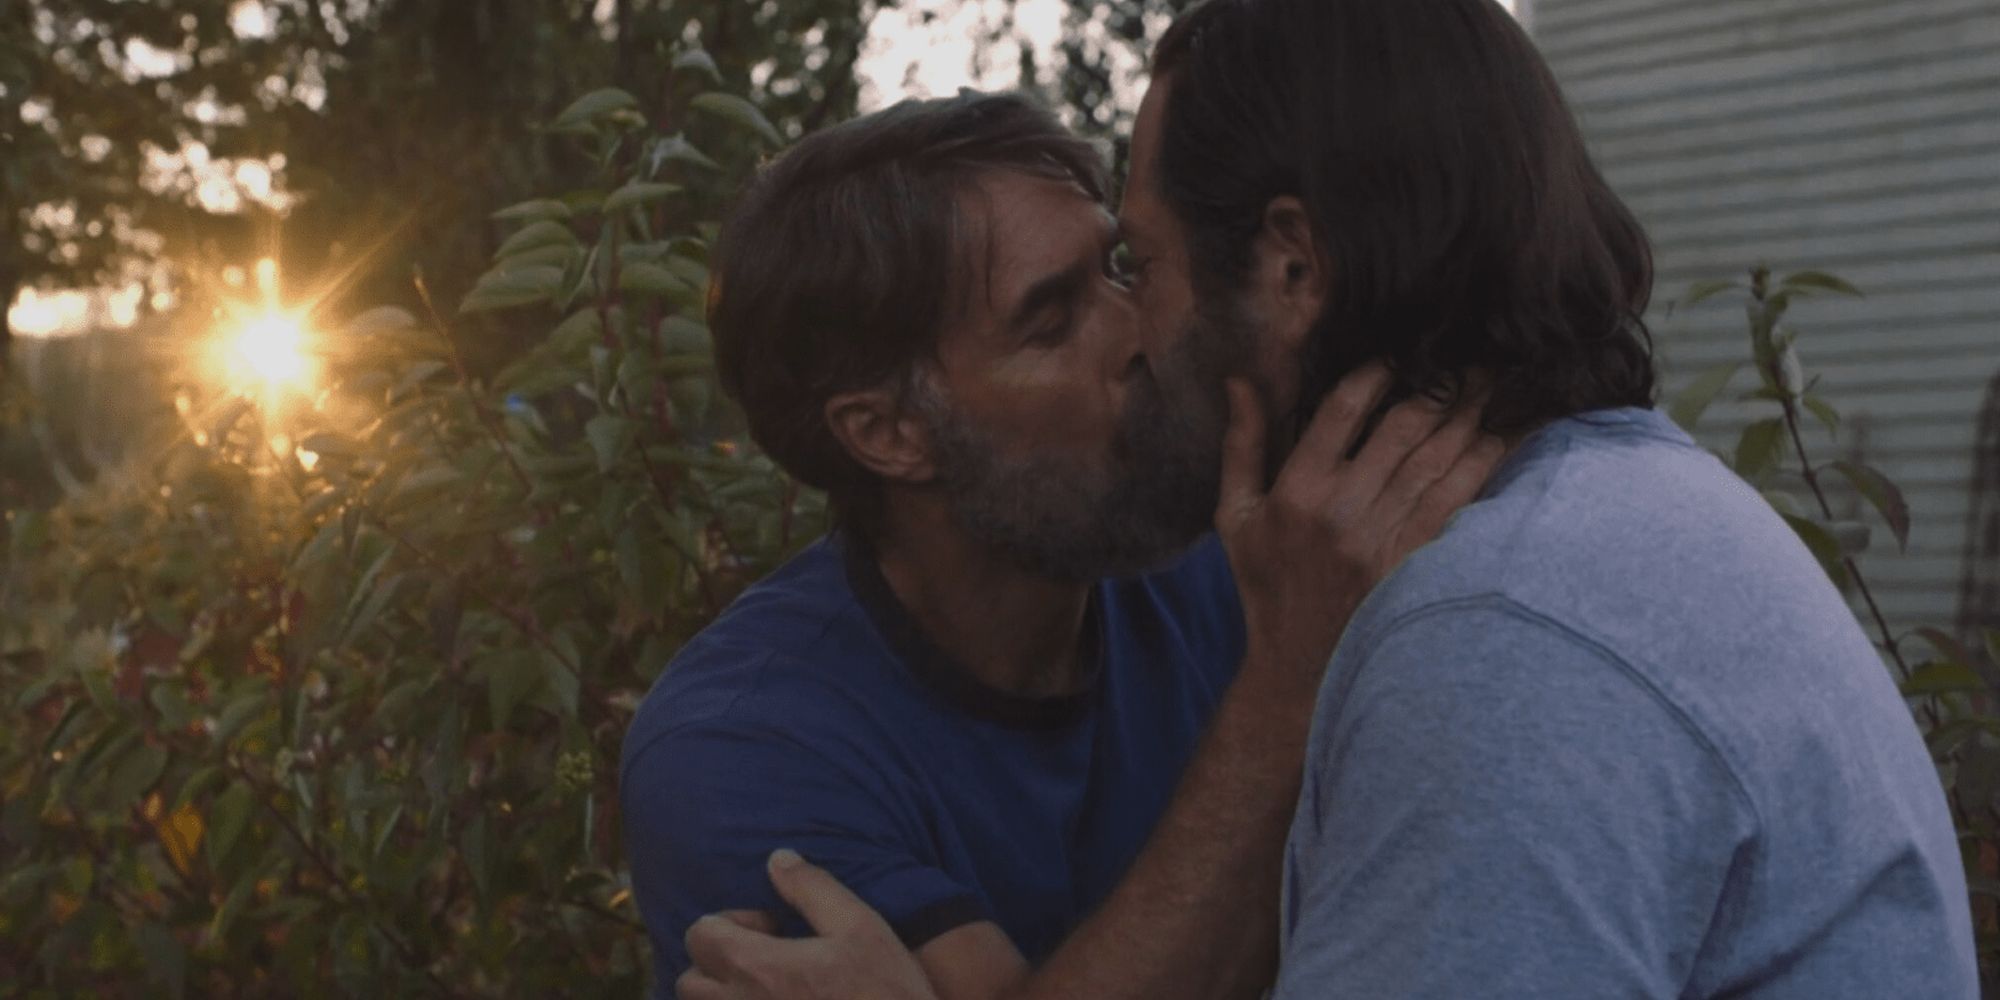 The Last of Us' Has an Entire Episode Focused on Its Gay Characters